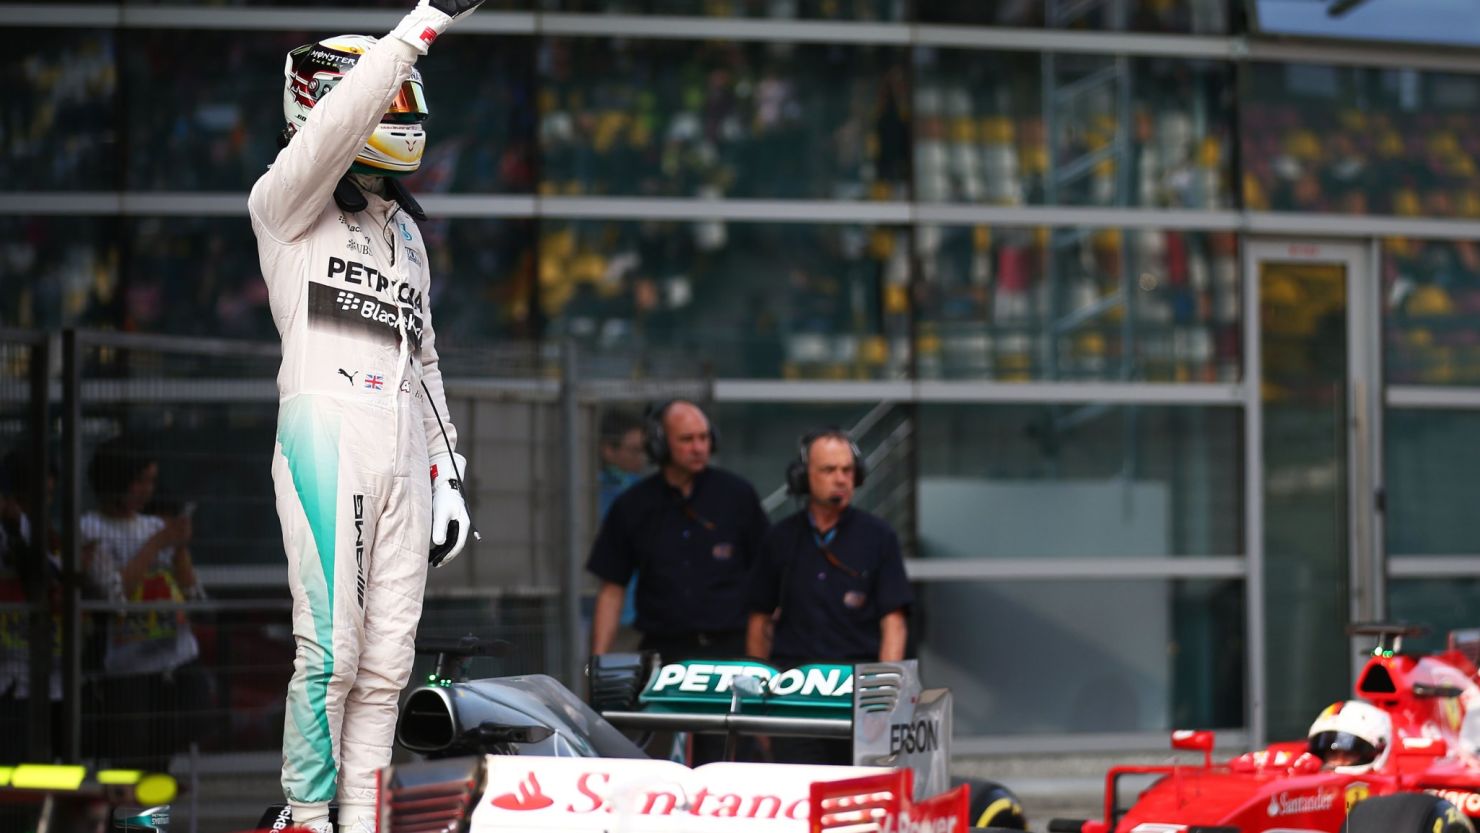 Lewis Hamilton celebrates after taking pole position in Shanghai in dramatic fashion.